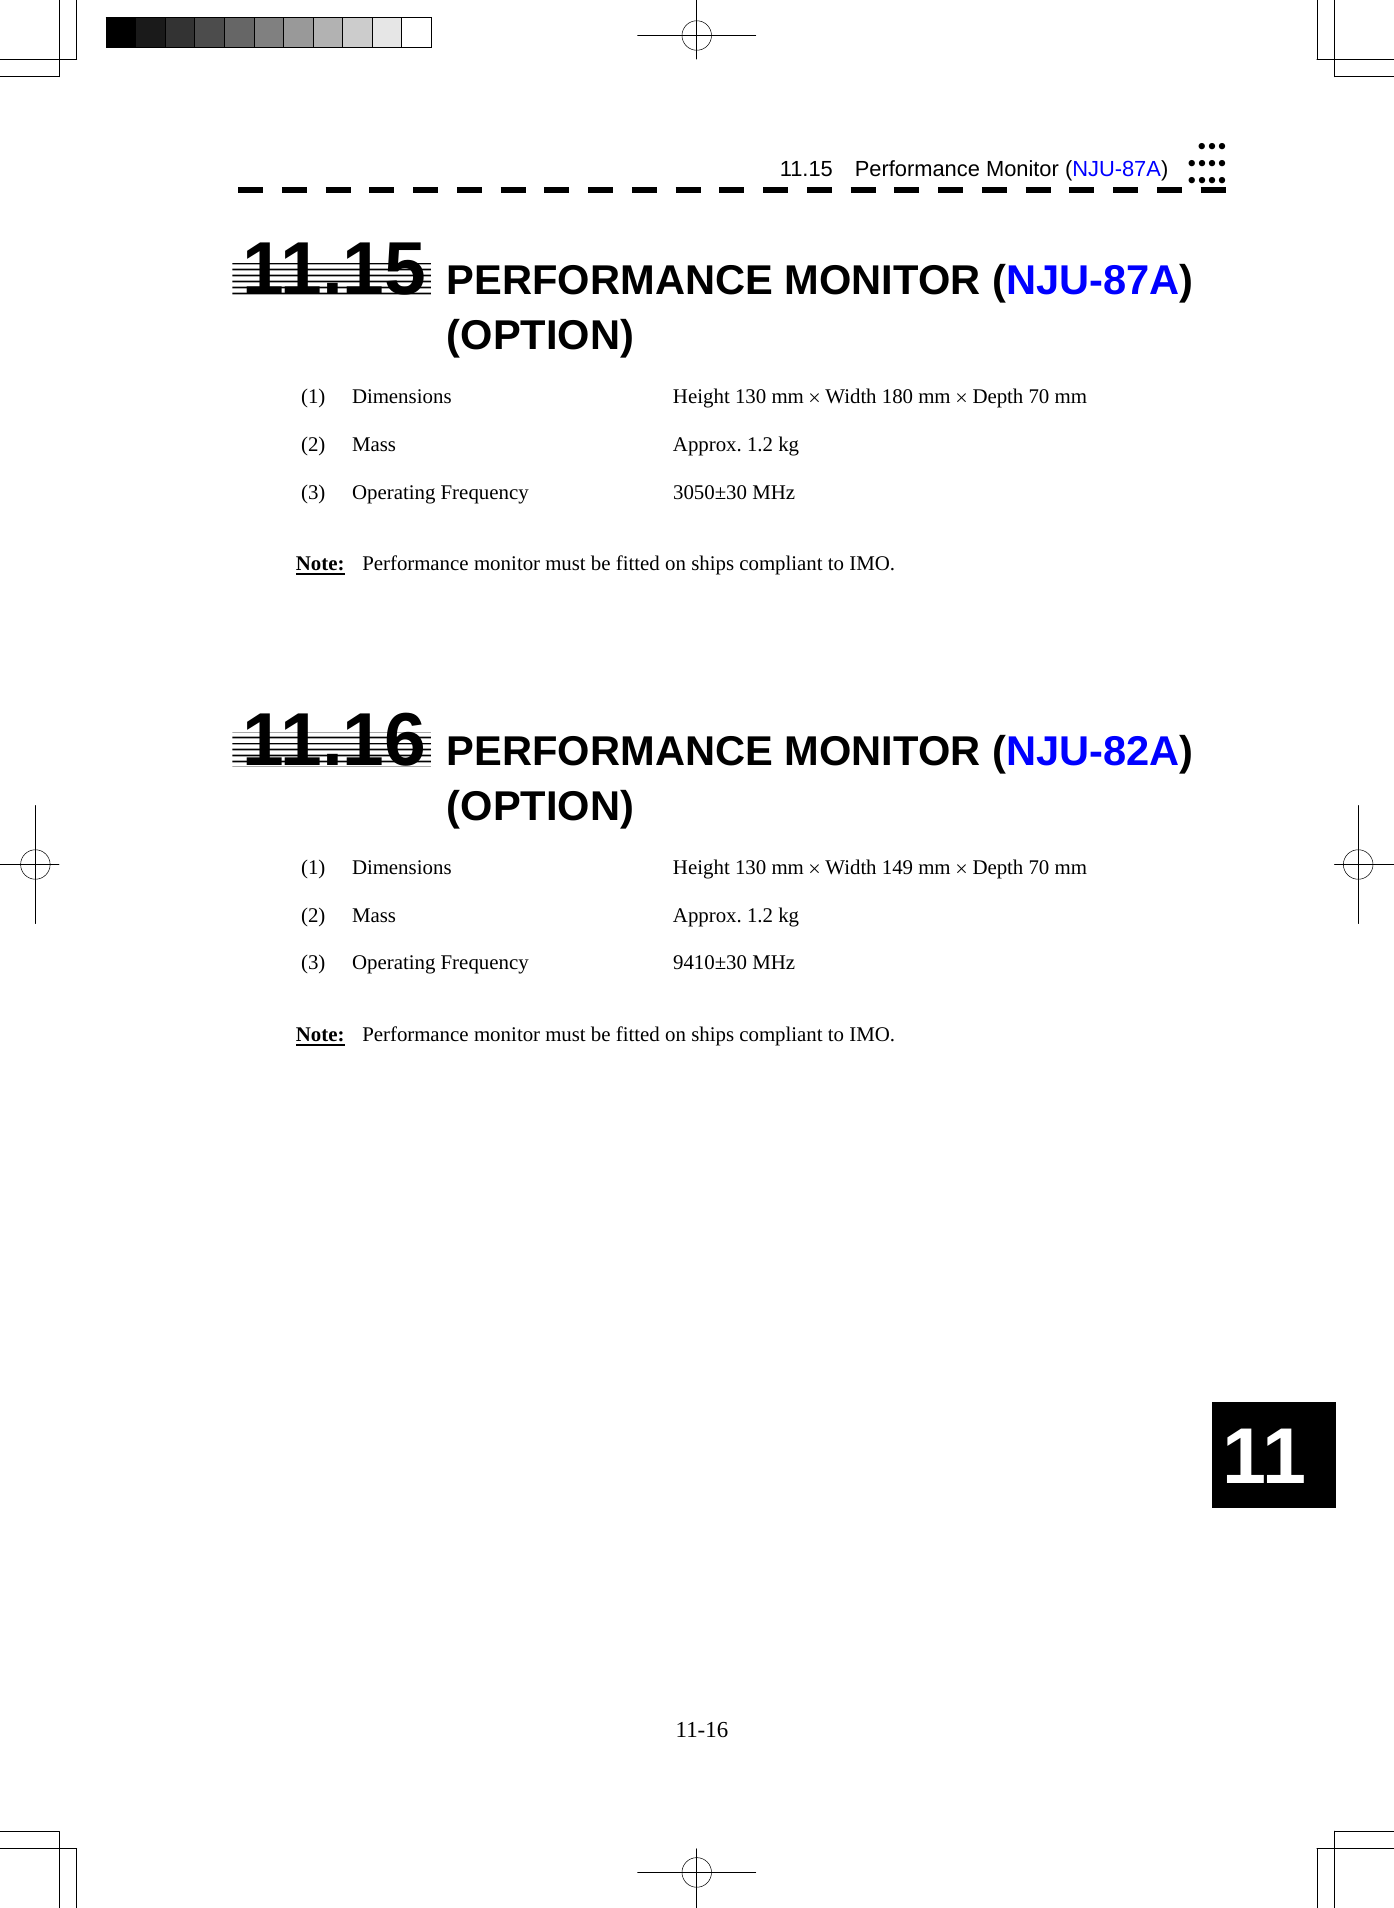  11-16 11.15  Performance Monitor (NJU-87A)yyyyyyyyyyy11 11.15  PERFORMANCE MONITOR (NJU-87A) (OPTION)  (1)  Dimensions  Height 130 mm × Width 180 mm × Depth 70 mm  (2)  Mass  Approx. 1.2 kg  (3)  Operating Frequency  3050±30 MHz   Note:  Performance monitor must be fitted on ships compliant to IMO.      11.16  PERFORMANCE MONITOR (NJU-82A) (OPTION)  (1)  Dimensions  Height 130 mm × Width 149 mm × Depth 70 mm  (2)  Mass  Approx. 1.2 kg  (3)  Operating Frequency  9410±30 MHz   Note:  Performance monitor must be fitted on ships compliant to IMO.  